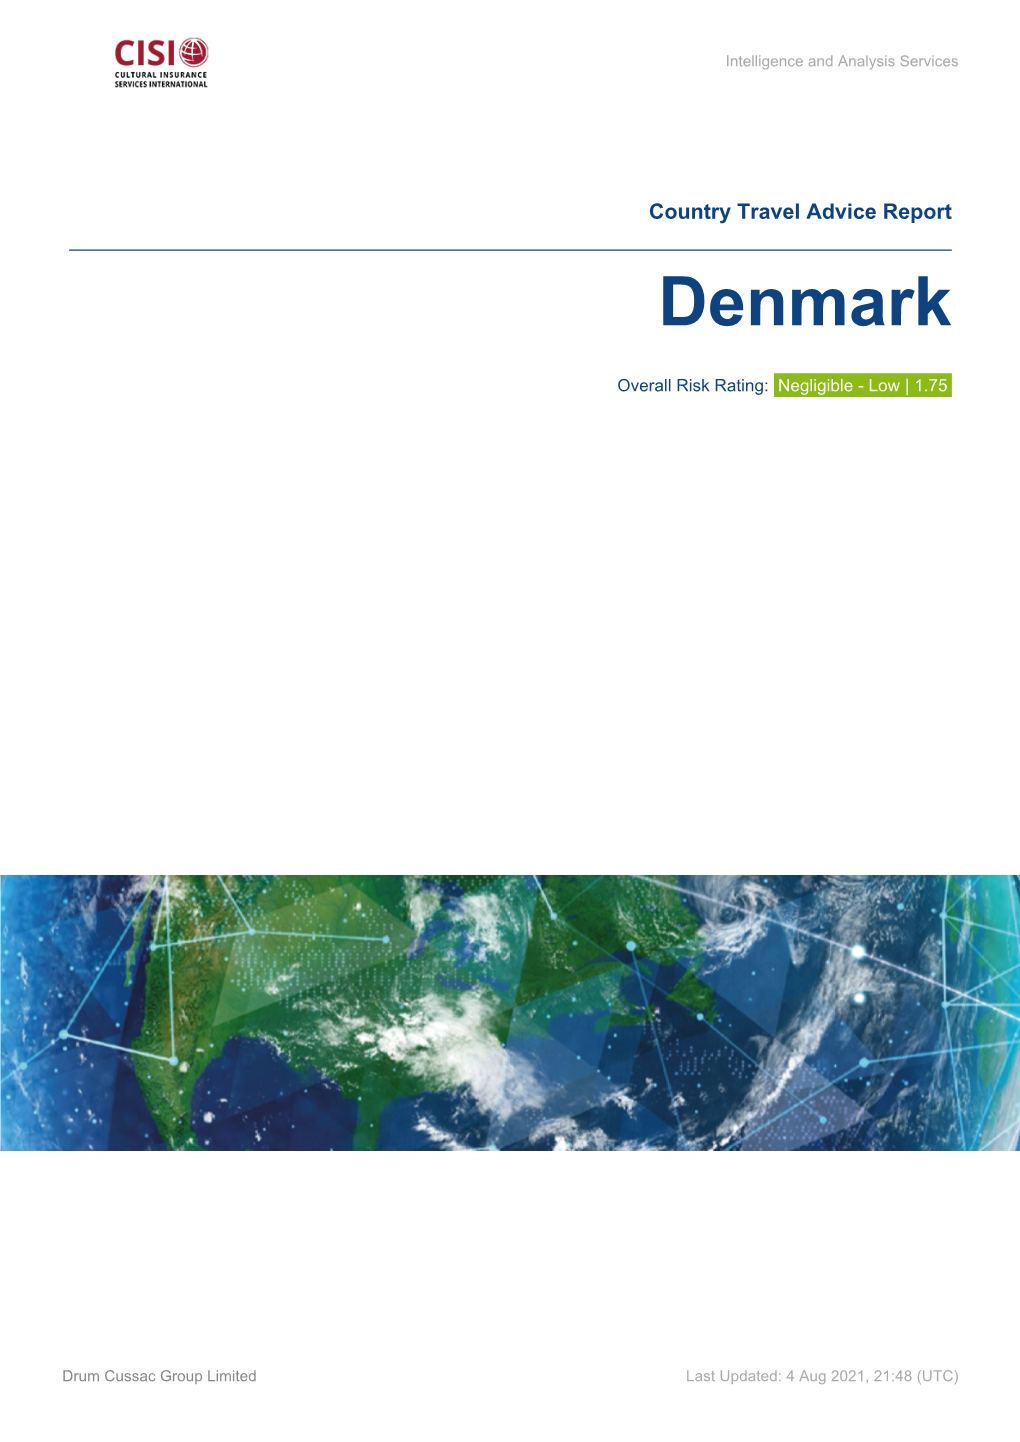 Security Rating for Denmark